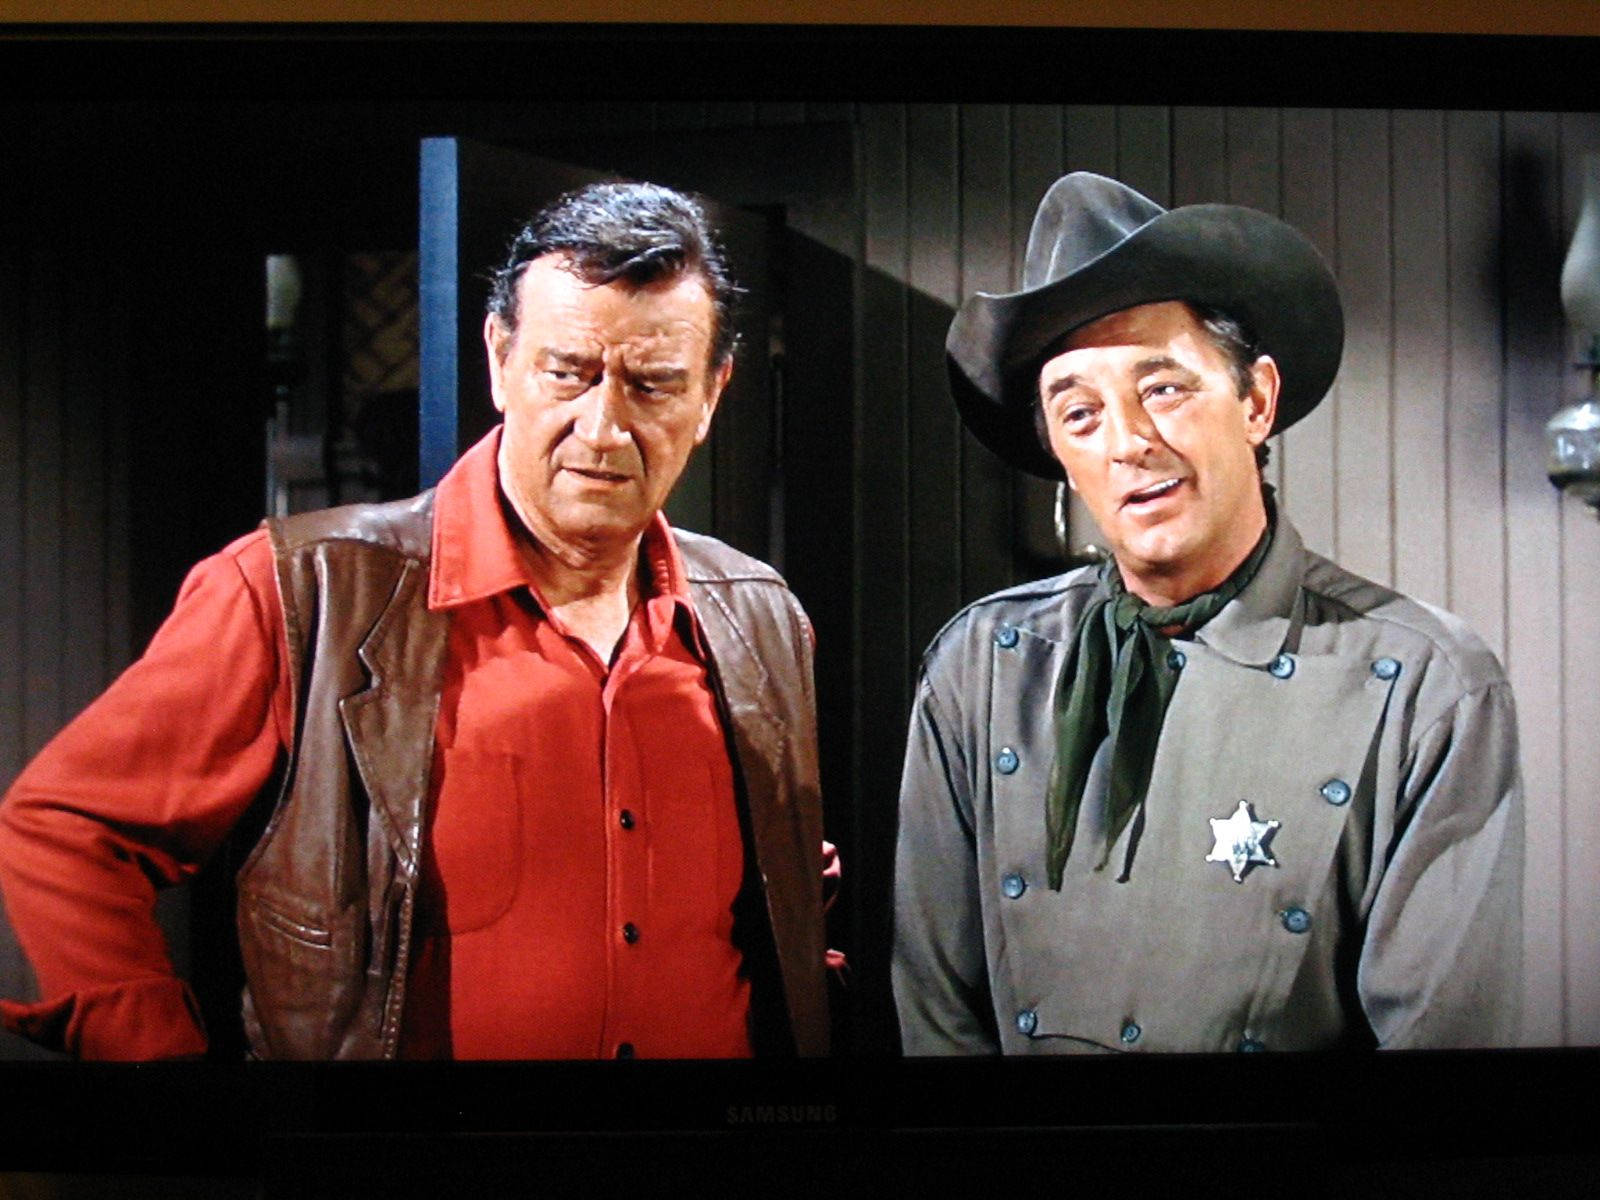 Robertmitchum Och John Wayne I Filmen. (note For Context: This Sentence Could Be A Suggestion For A Computer Or Mobile Wallpaper Featuring These Two Actors In A Movie Scene.) Wallpaper